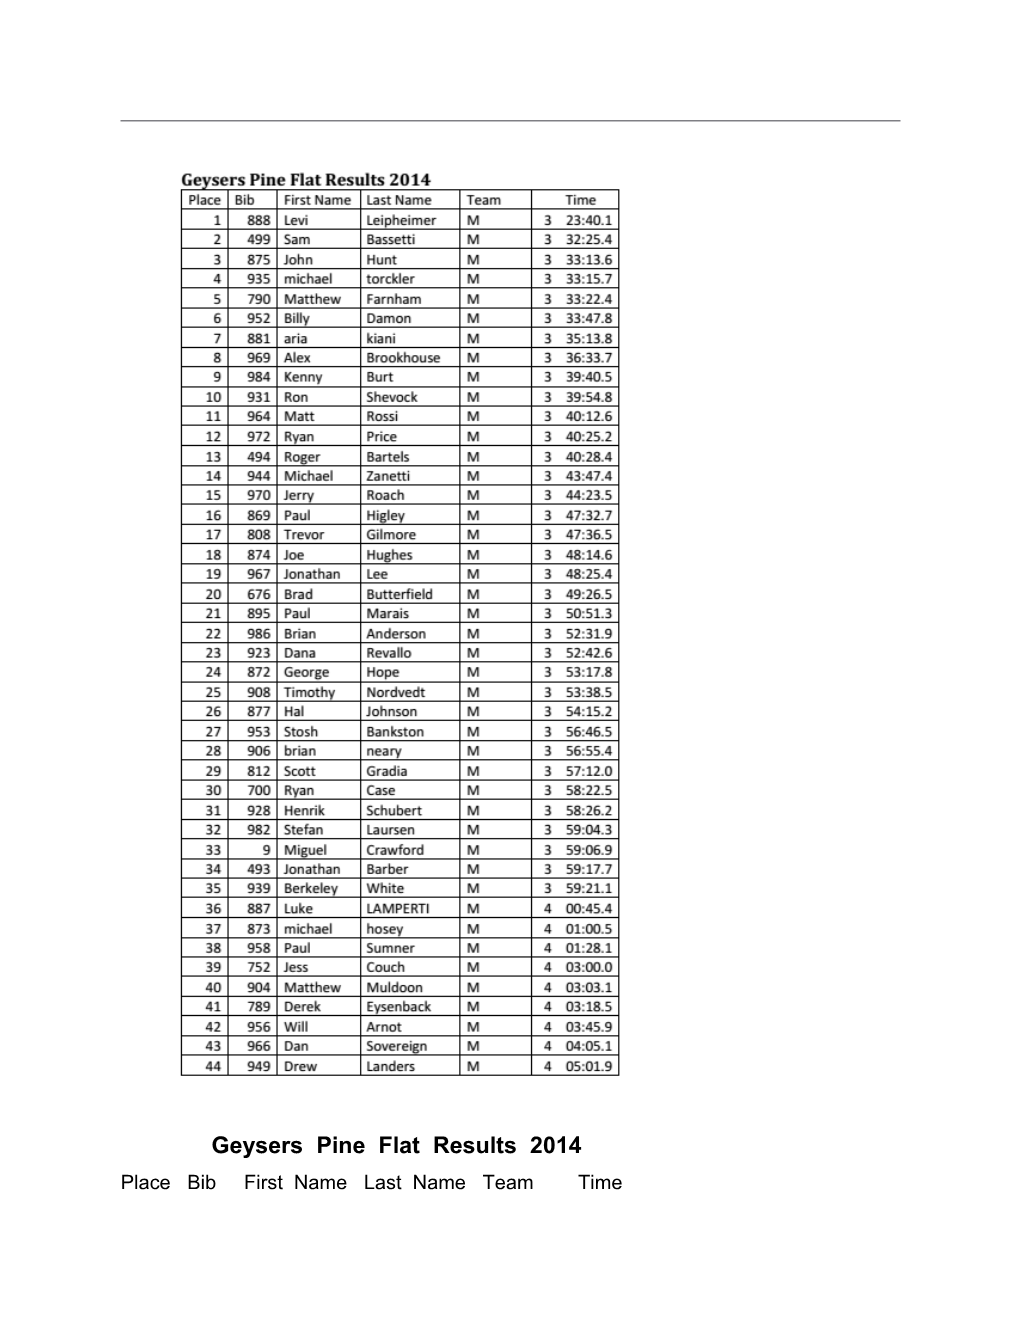 Geysers Pine Flat Results 2014